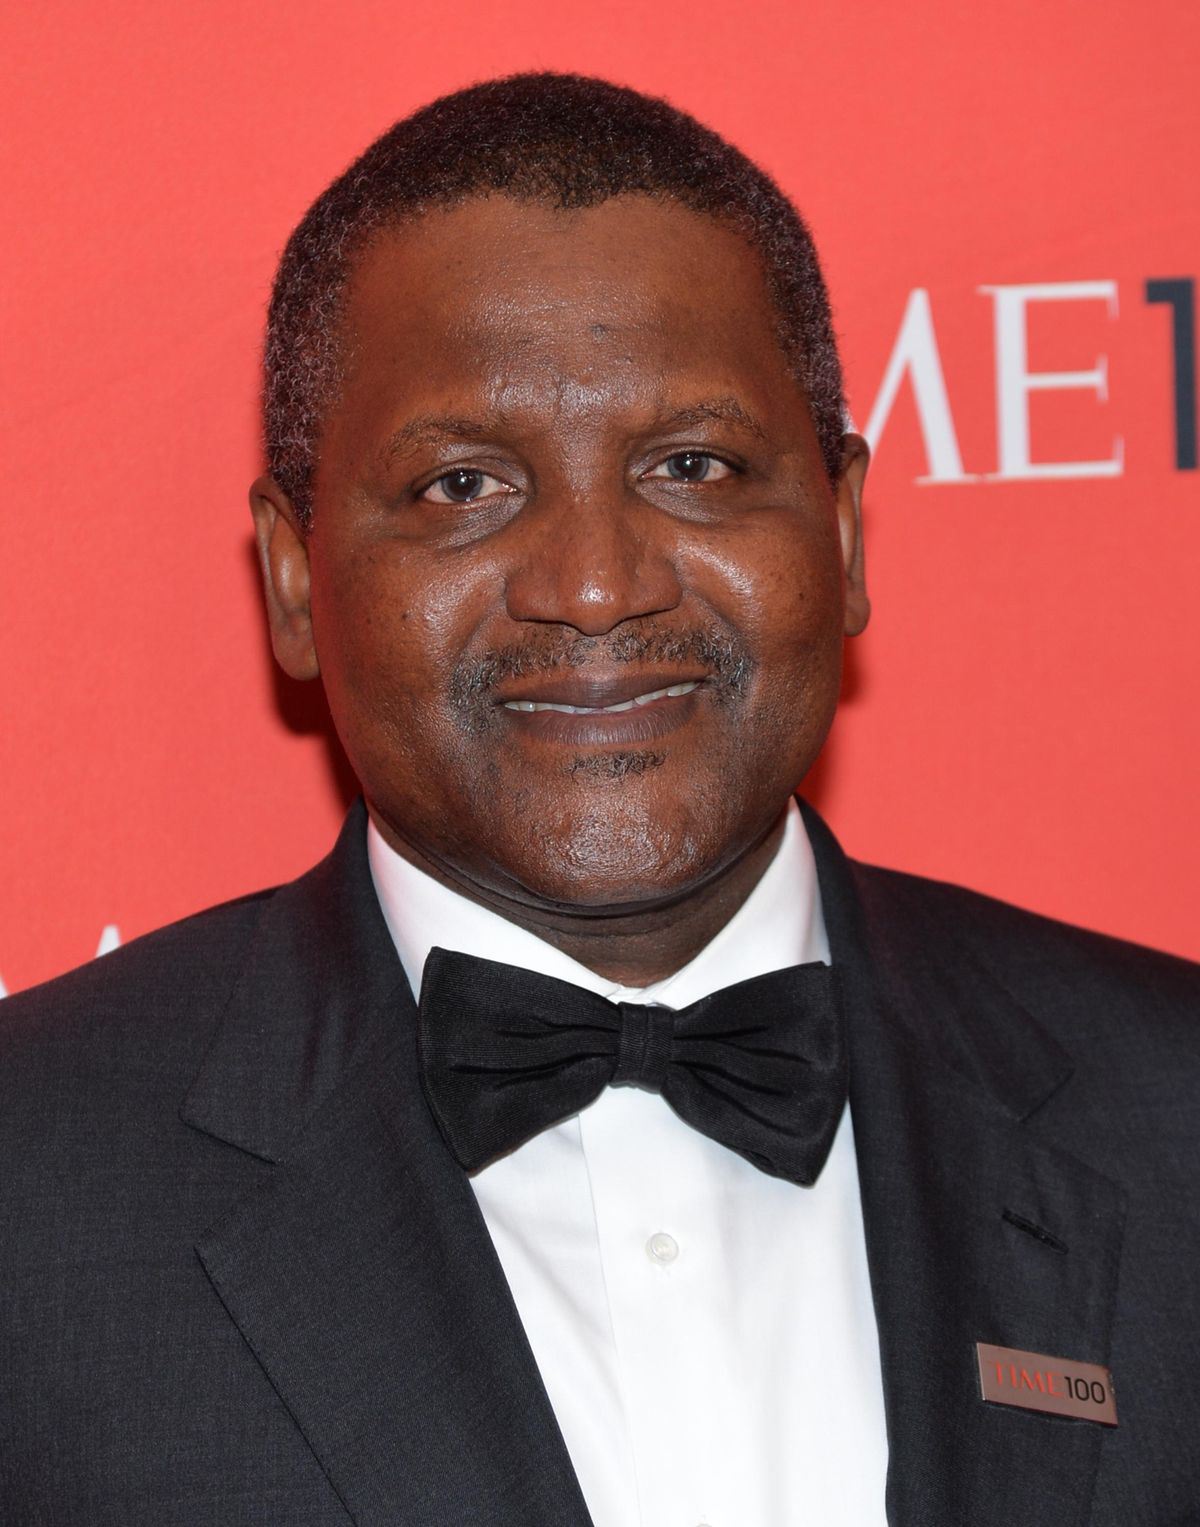 Dangote is the Richest black Person in the world